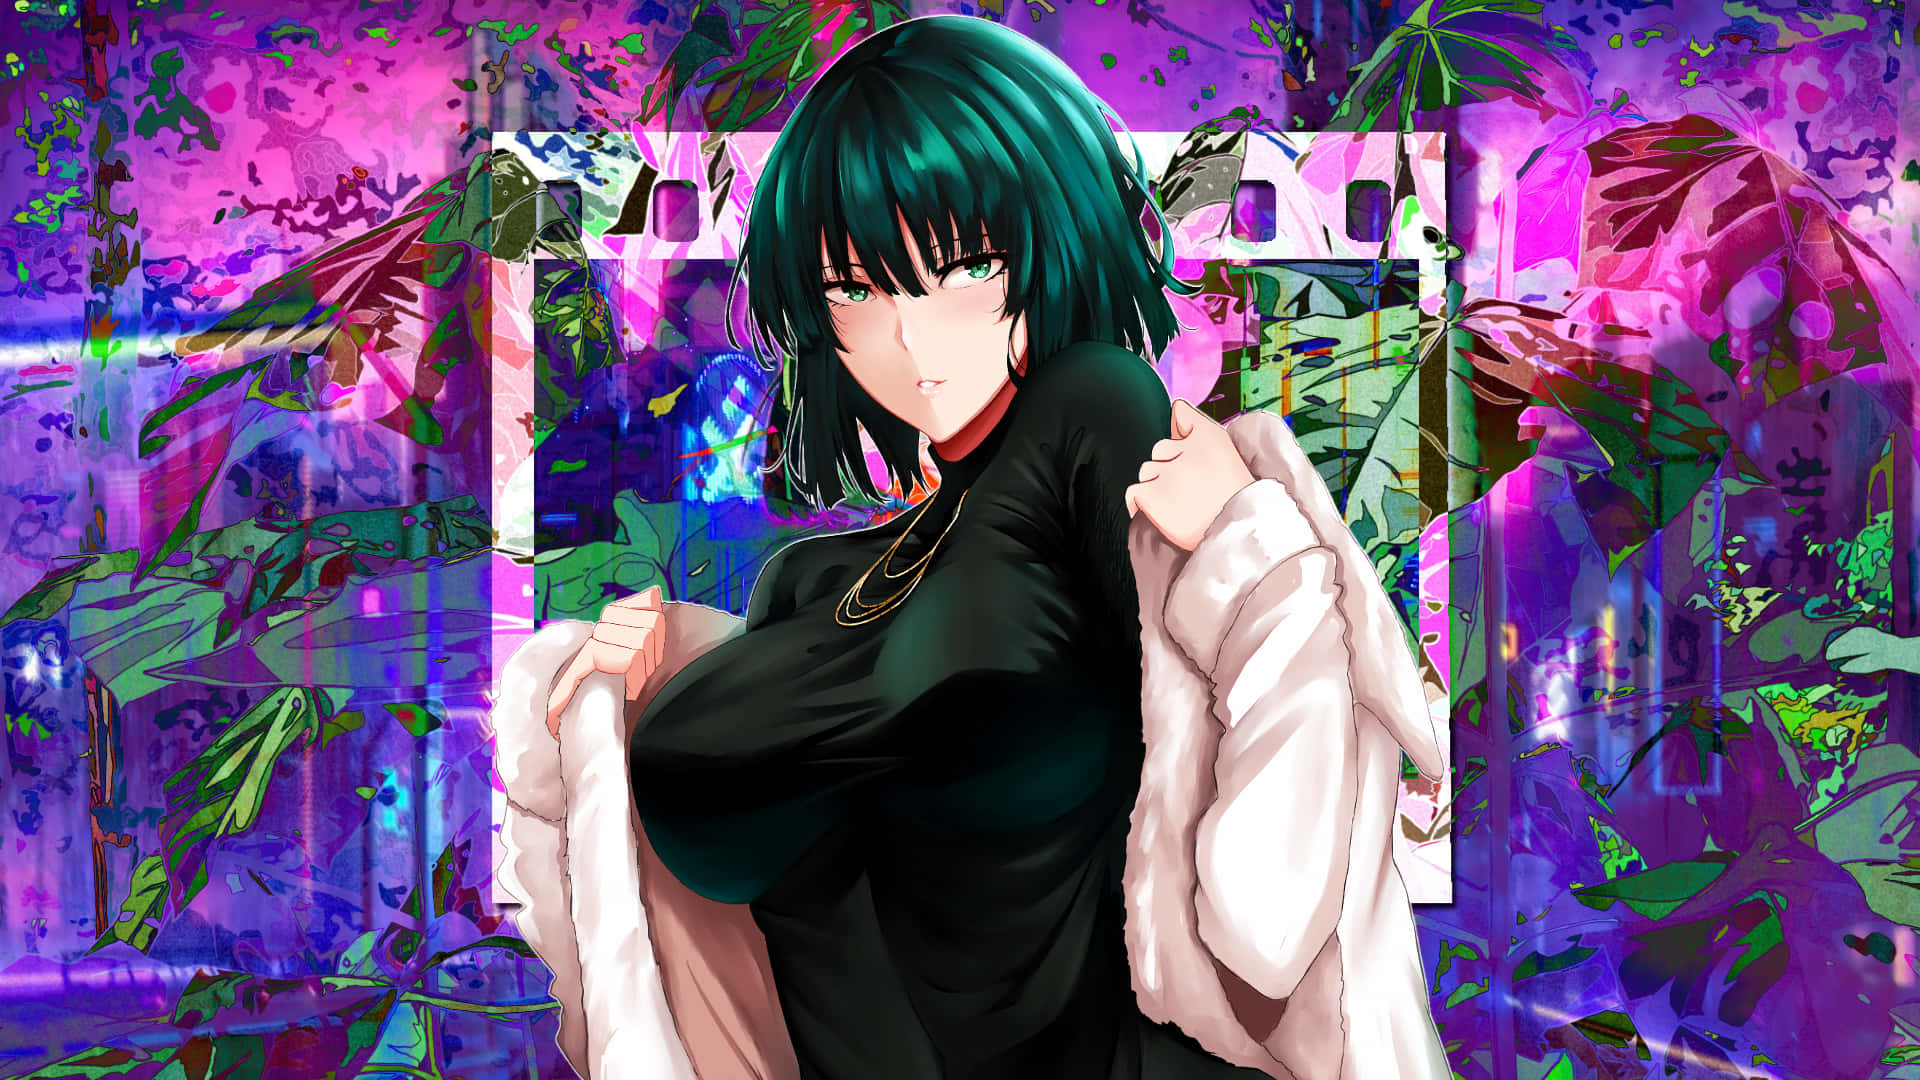 Fubuki in her iconic pose amid a snowy battlefield Wallpaper